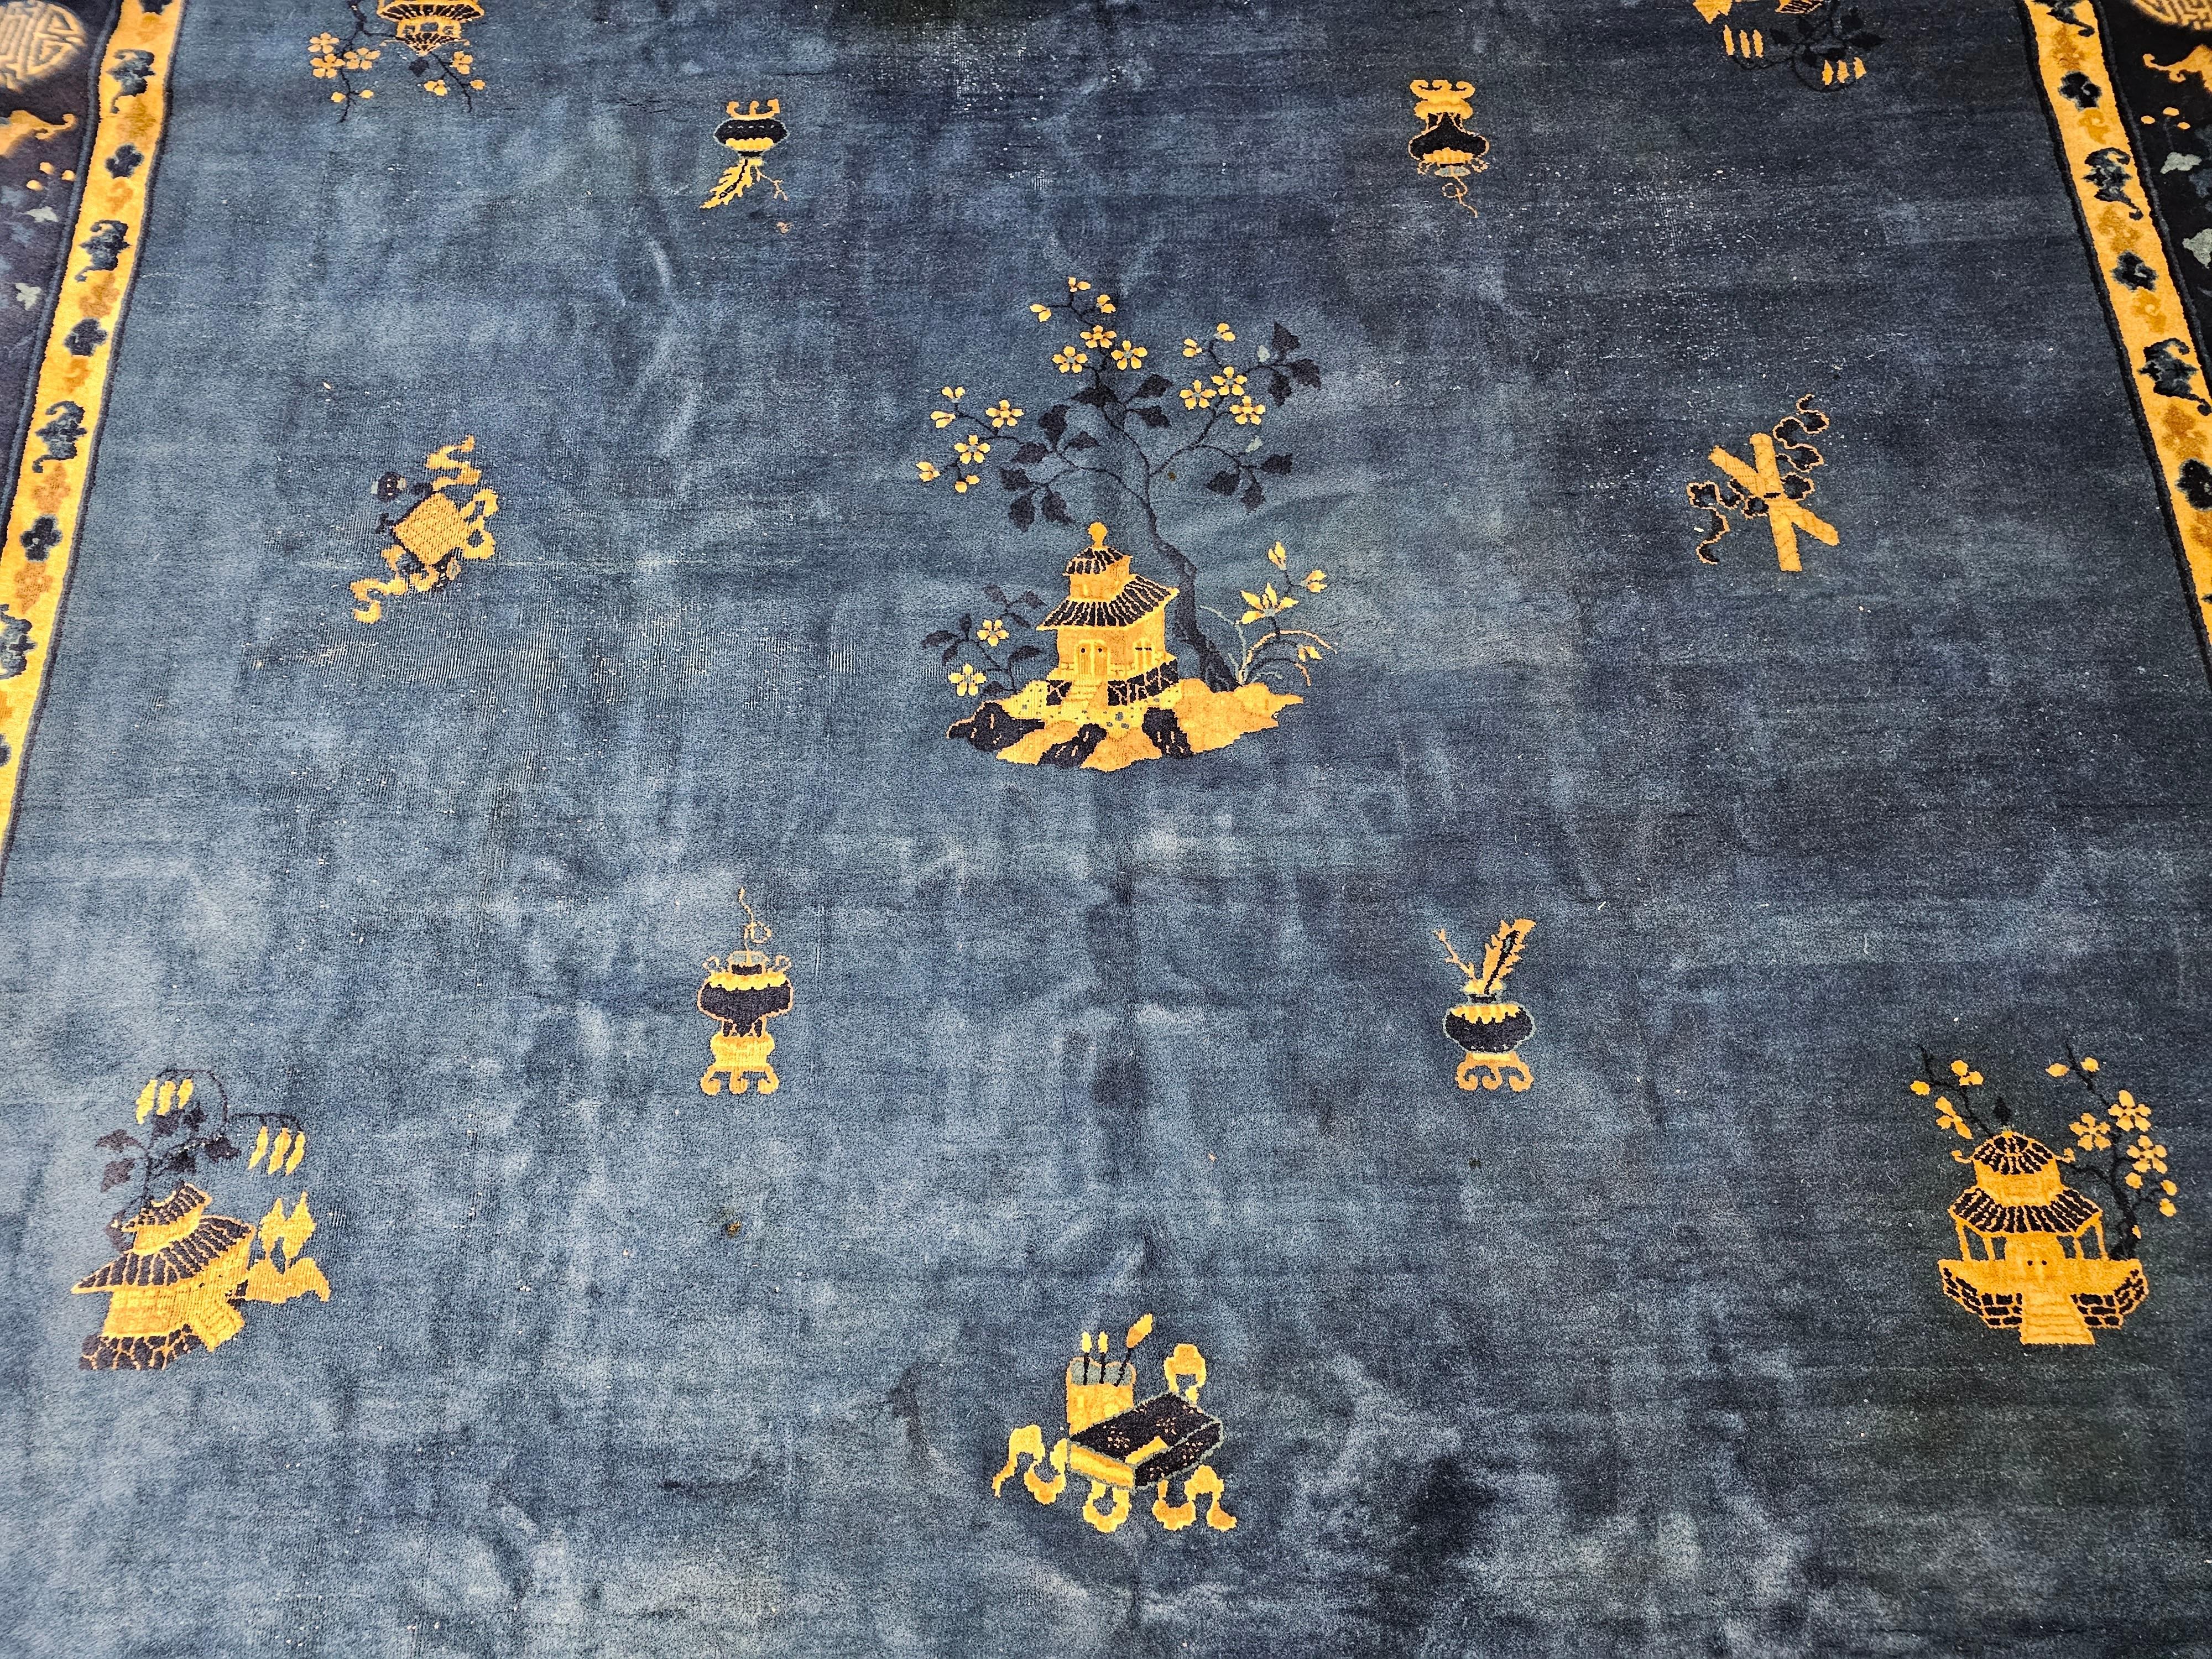 Vintage Art Deco Chinese Rug with Auspicious Symbols in Royal Blue, Navy, Camel In Good Condition For Sale In Barrington, IL